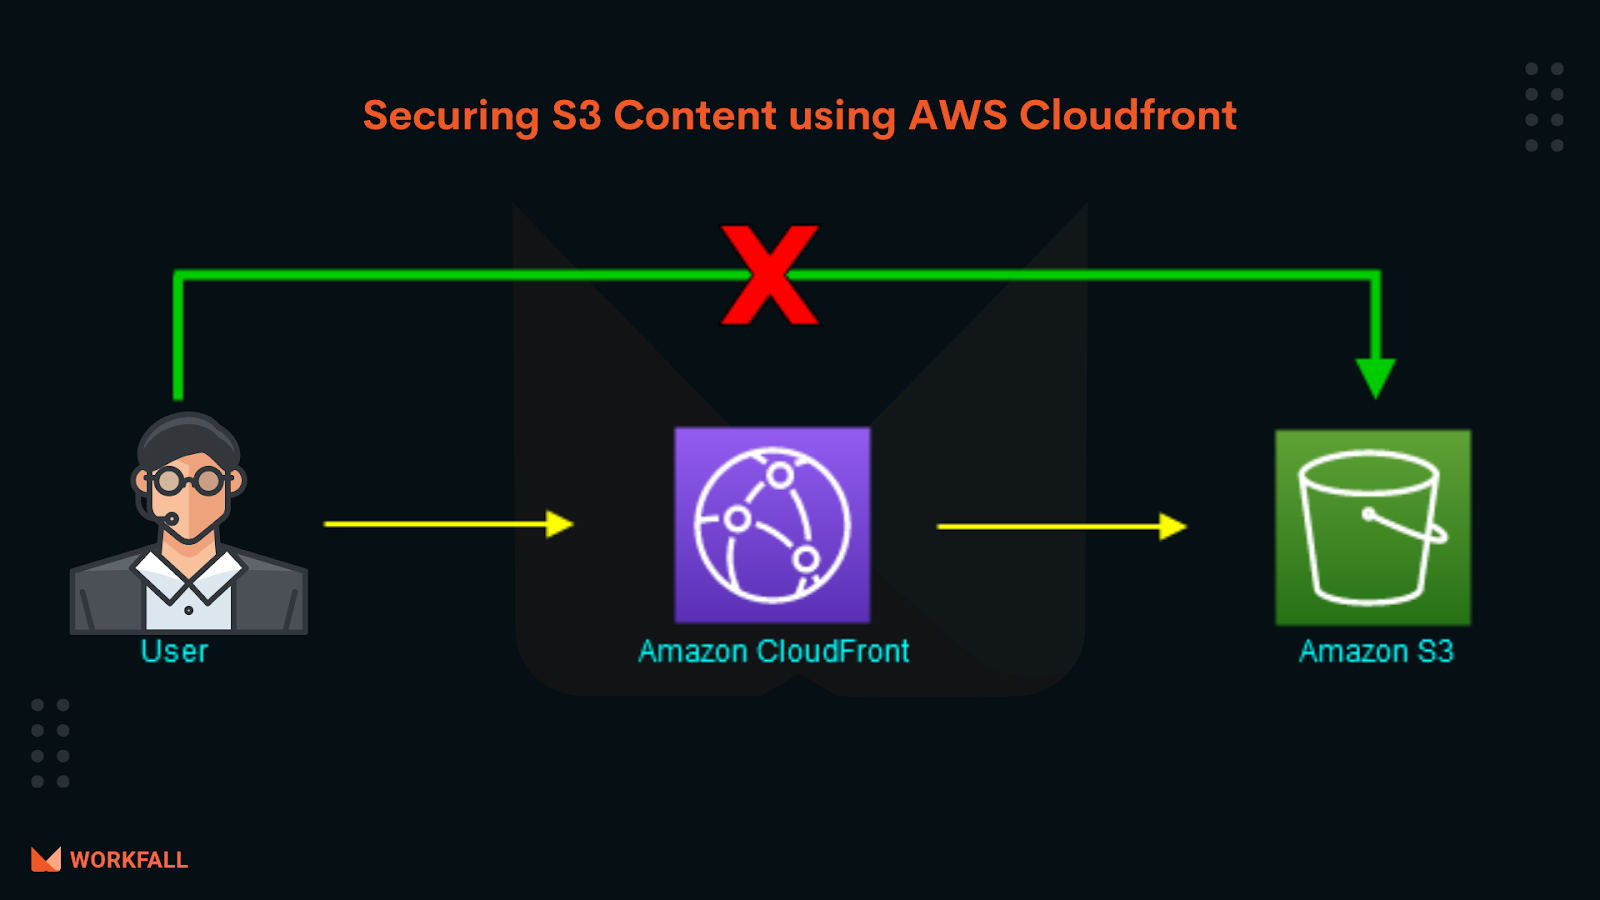 AWS CloudFront and AWS S3